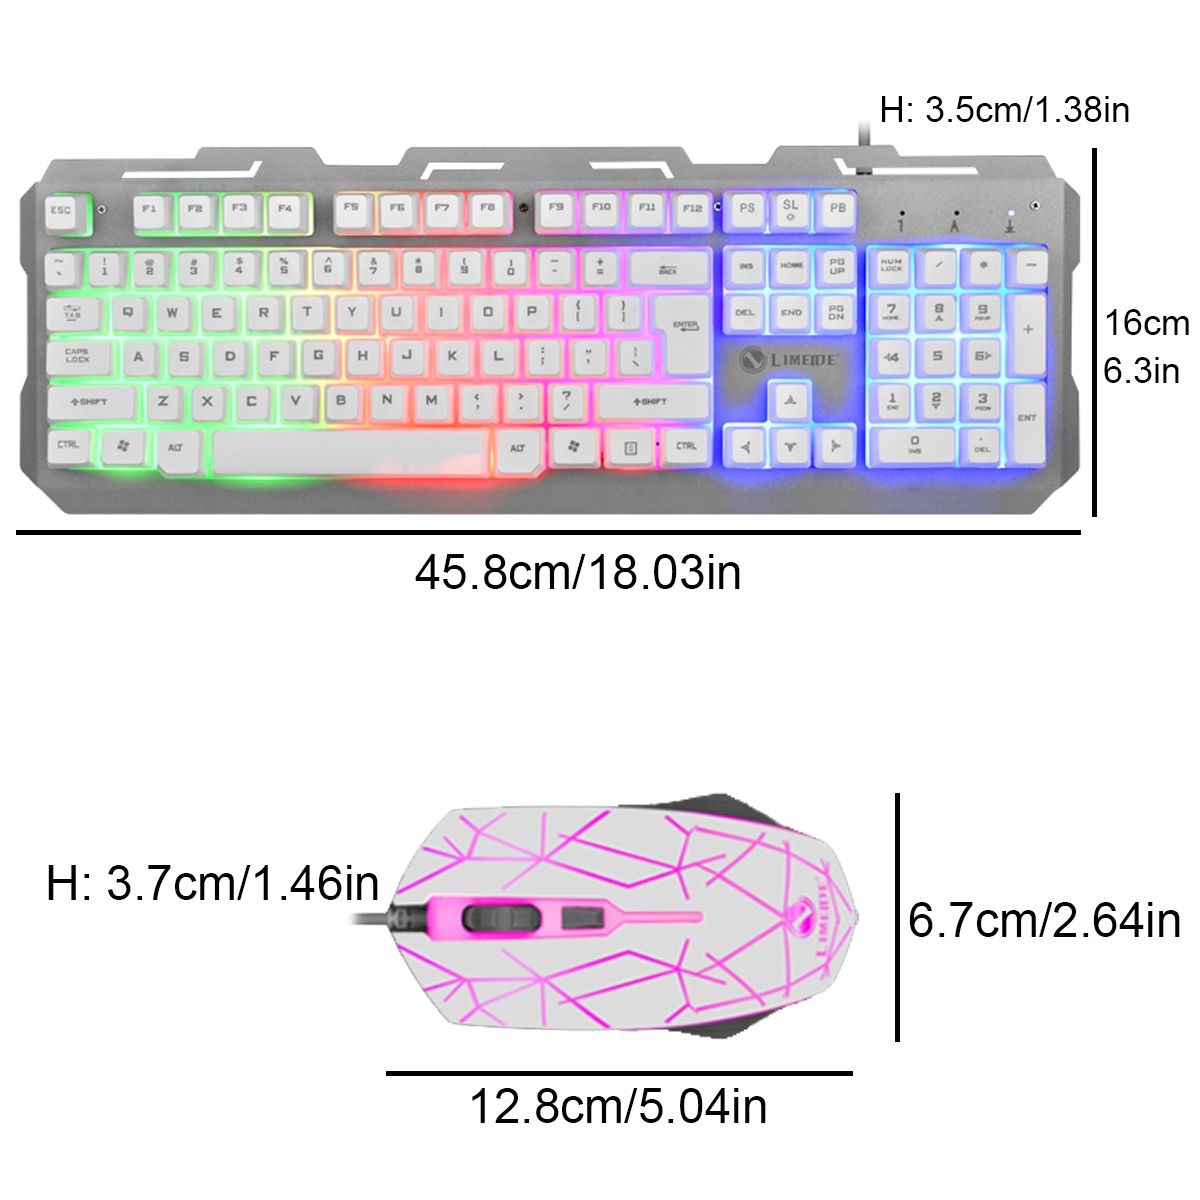 104-Key-USB-Wired-Gaming-Keyboard-and-Mouse-Set-Waterproof-LED-Multi-Colored-Changing-Backlight-Mous-1739283